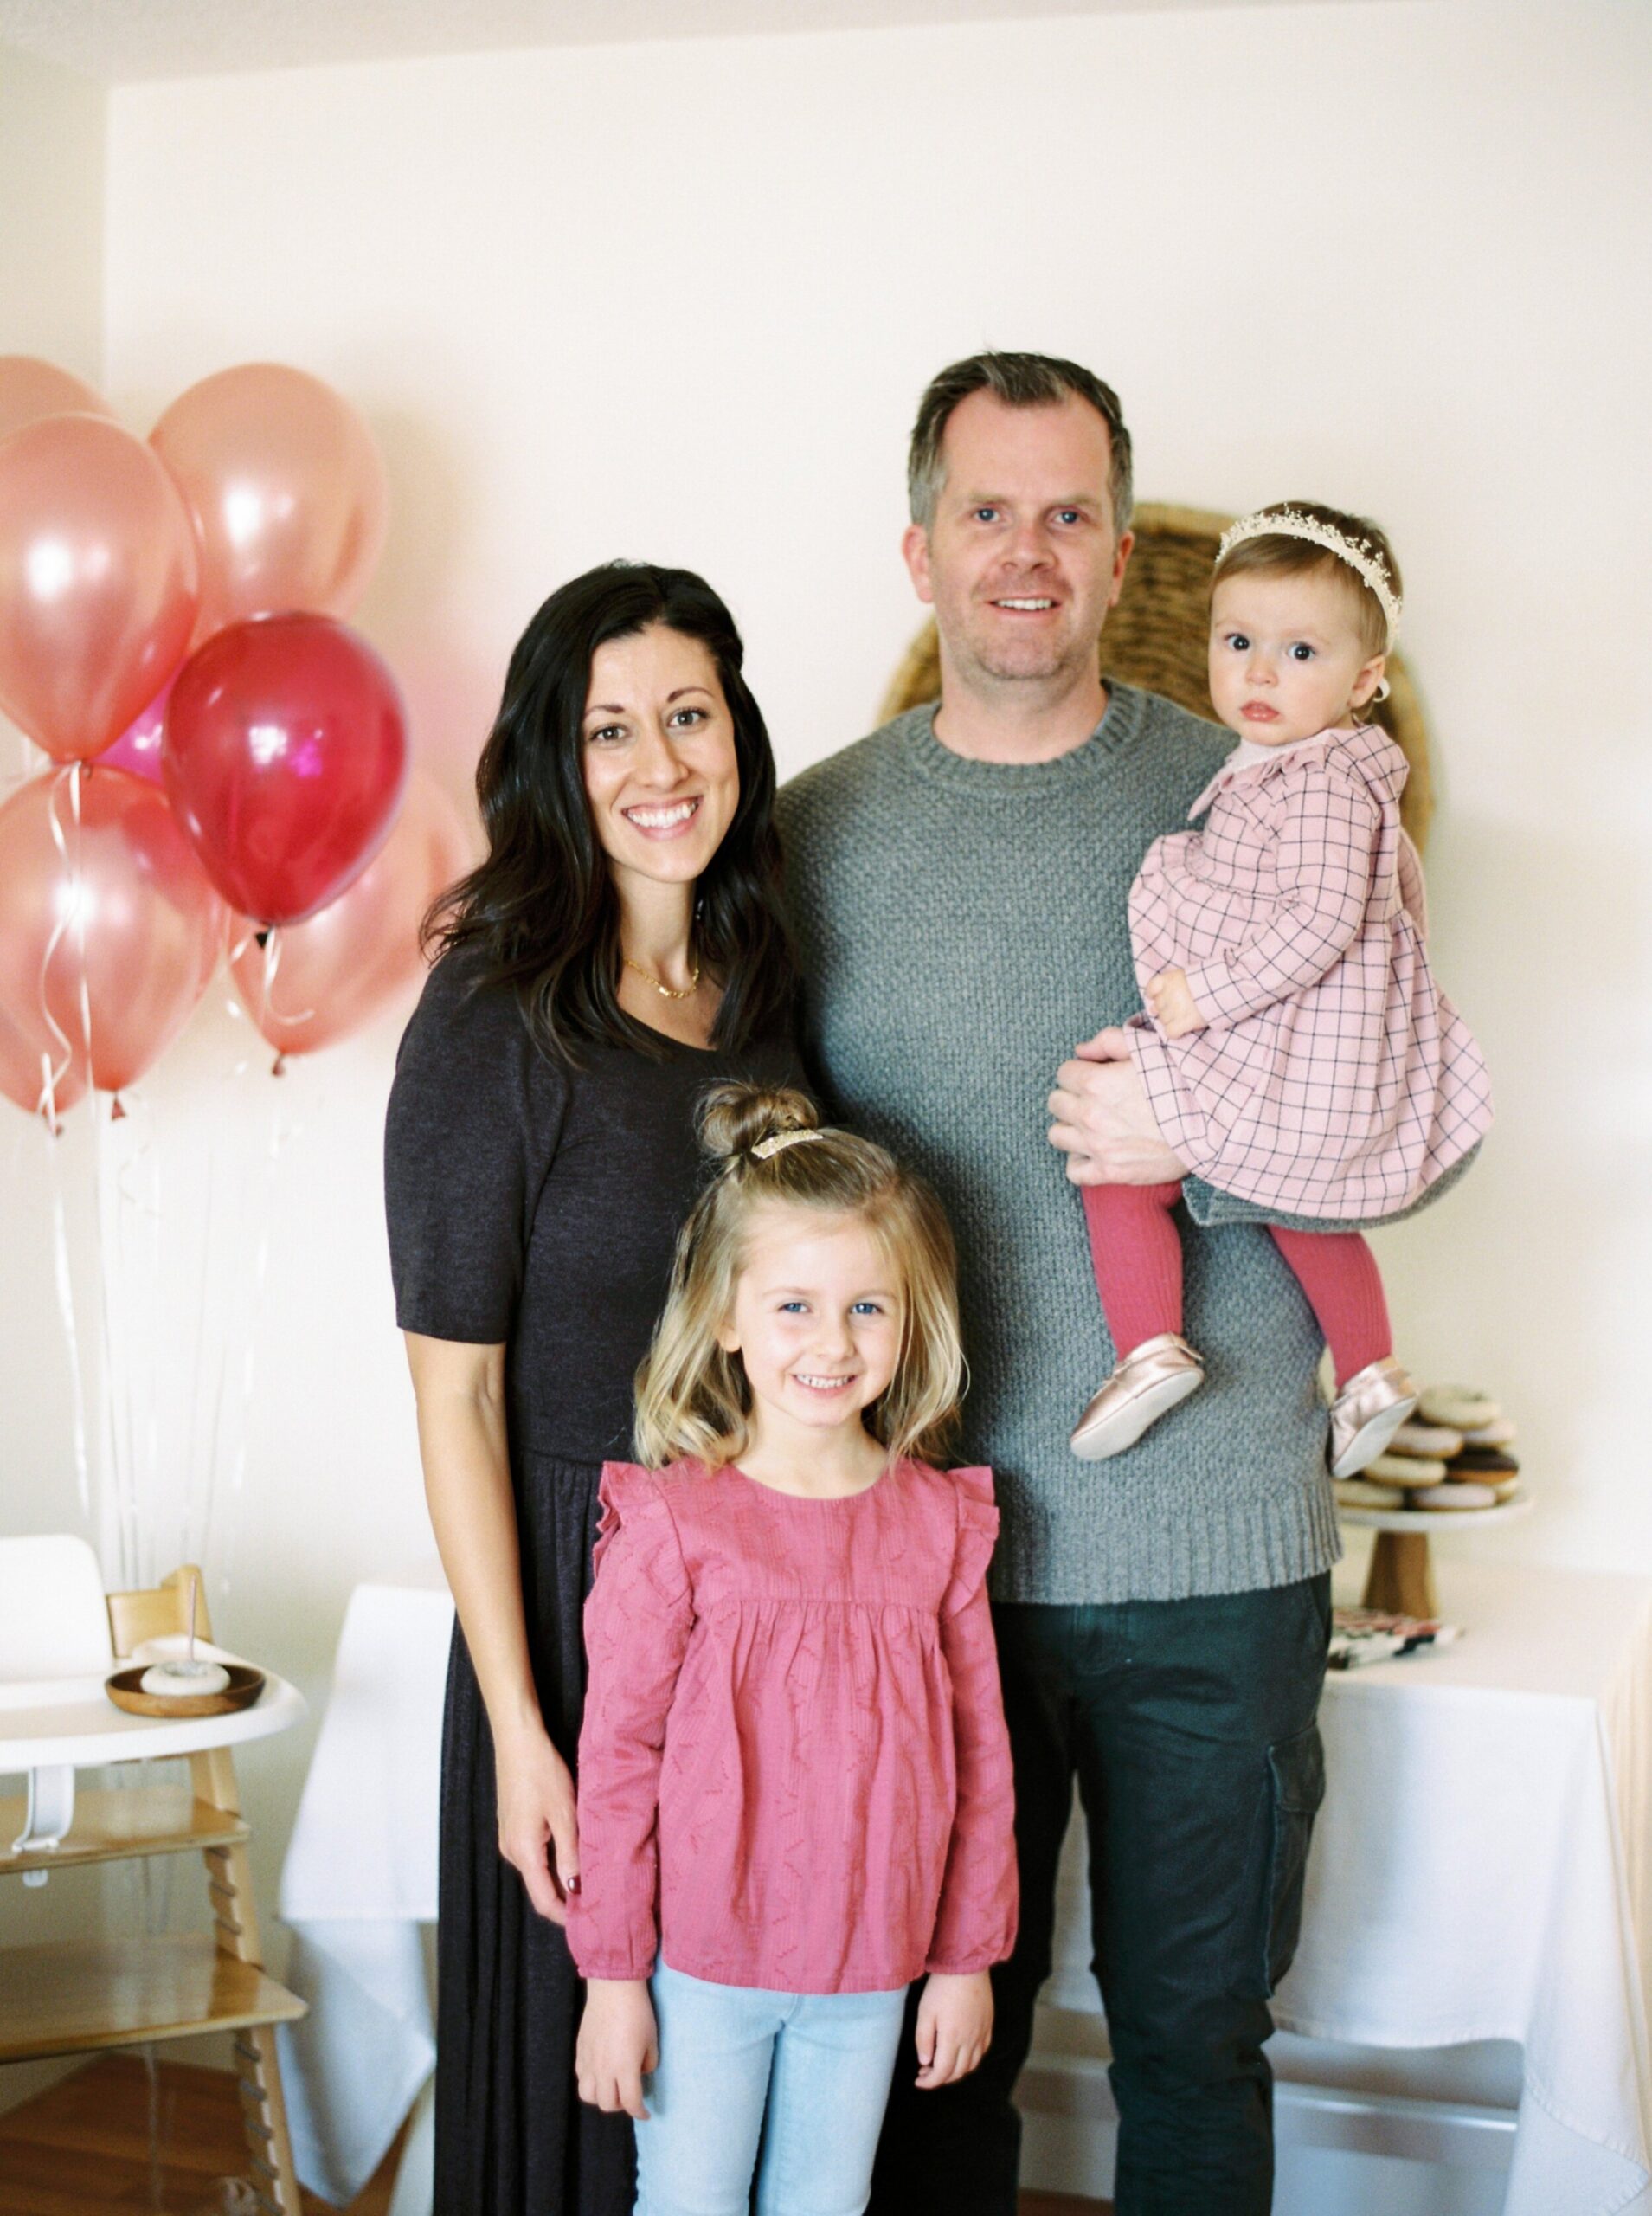  lunas first bithday party family portrait | film photographer 